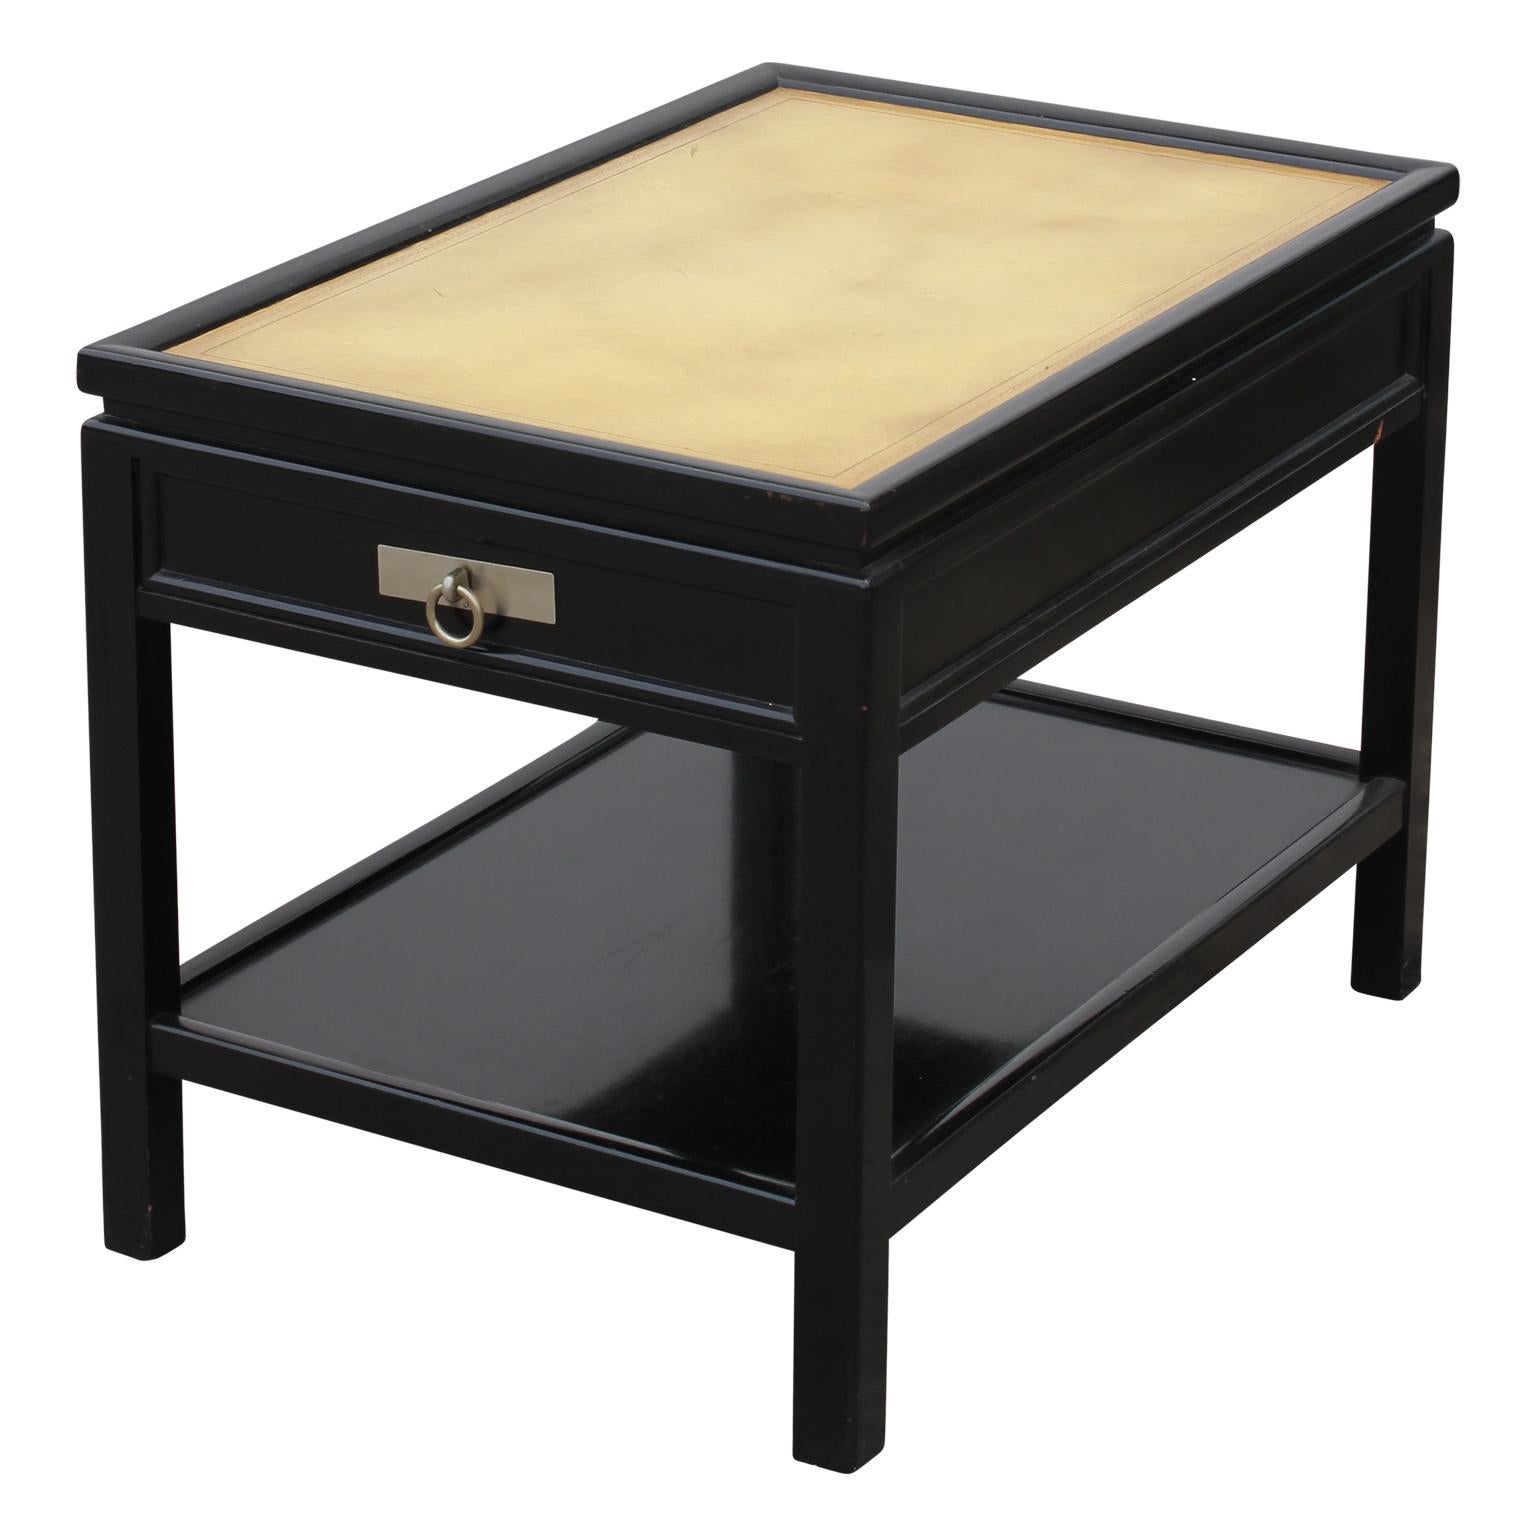 Incredible pair of black lacquer end tables. They have leather tops with a gold and black boarder. They have a small drawer on the front, and these end tables are attributed to Michael Taylor for Baker Furniture.
Note the handle on the front of the